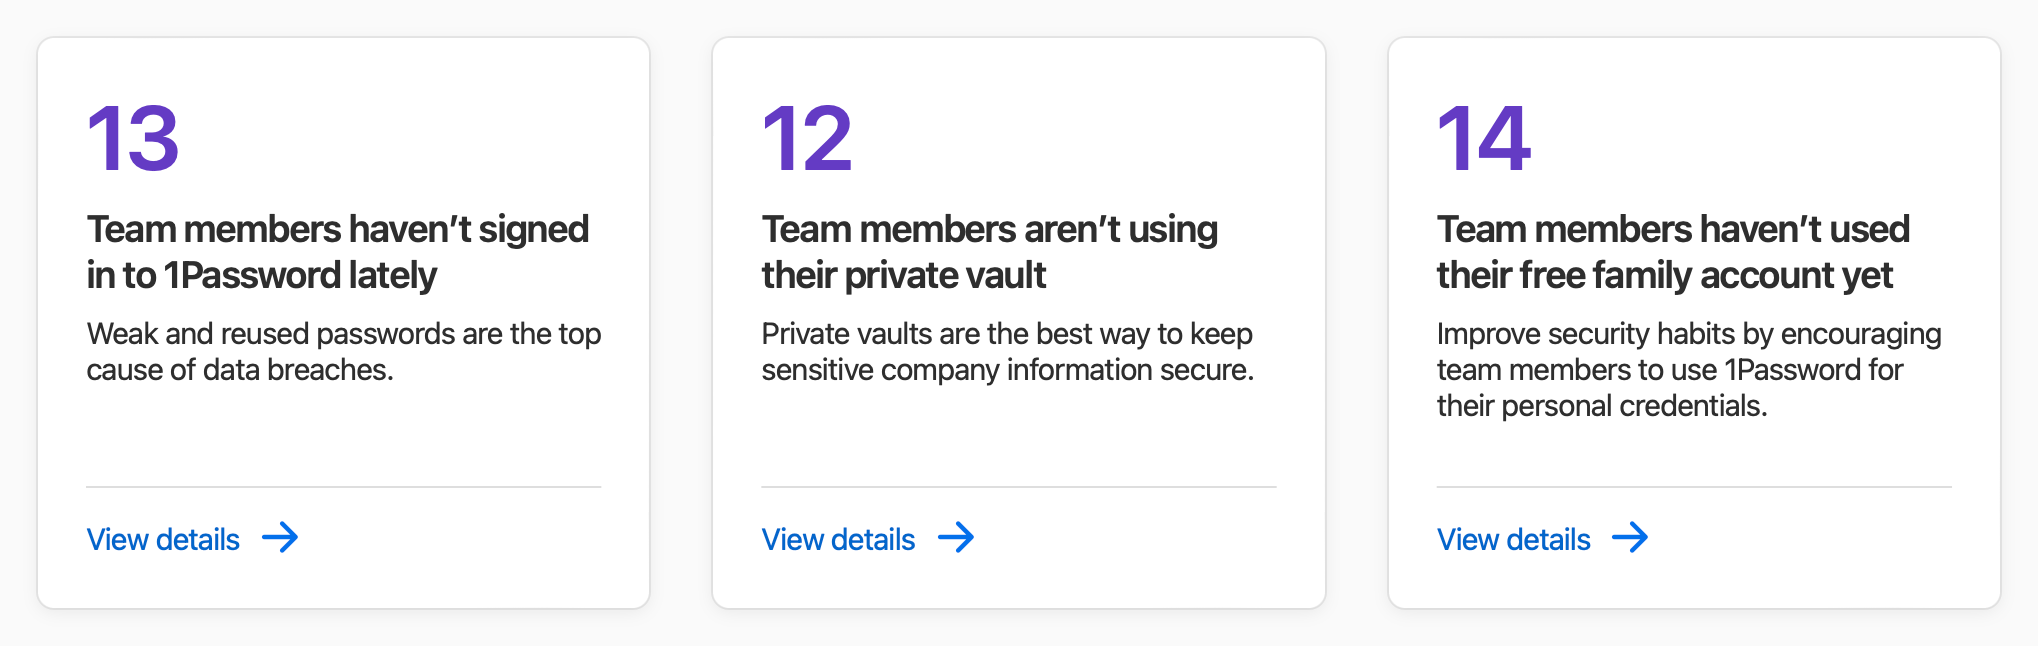 The team usage section of the Insights page on 1password.com.